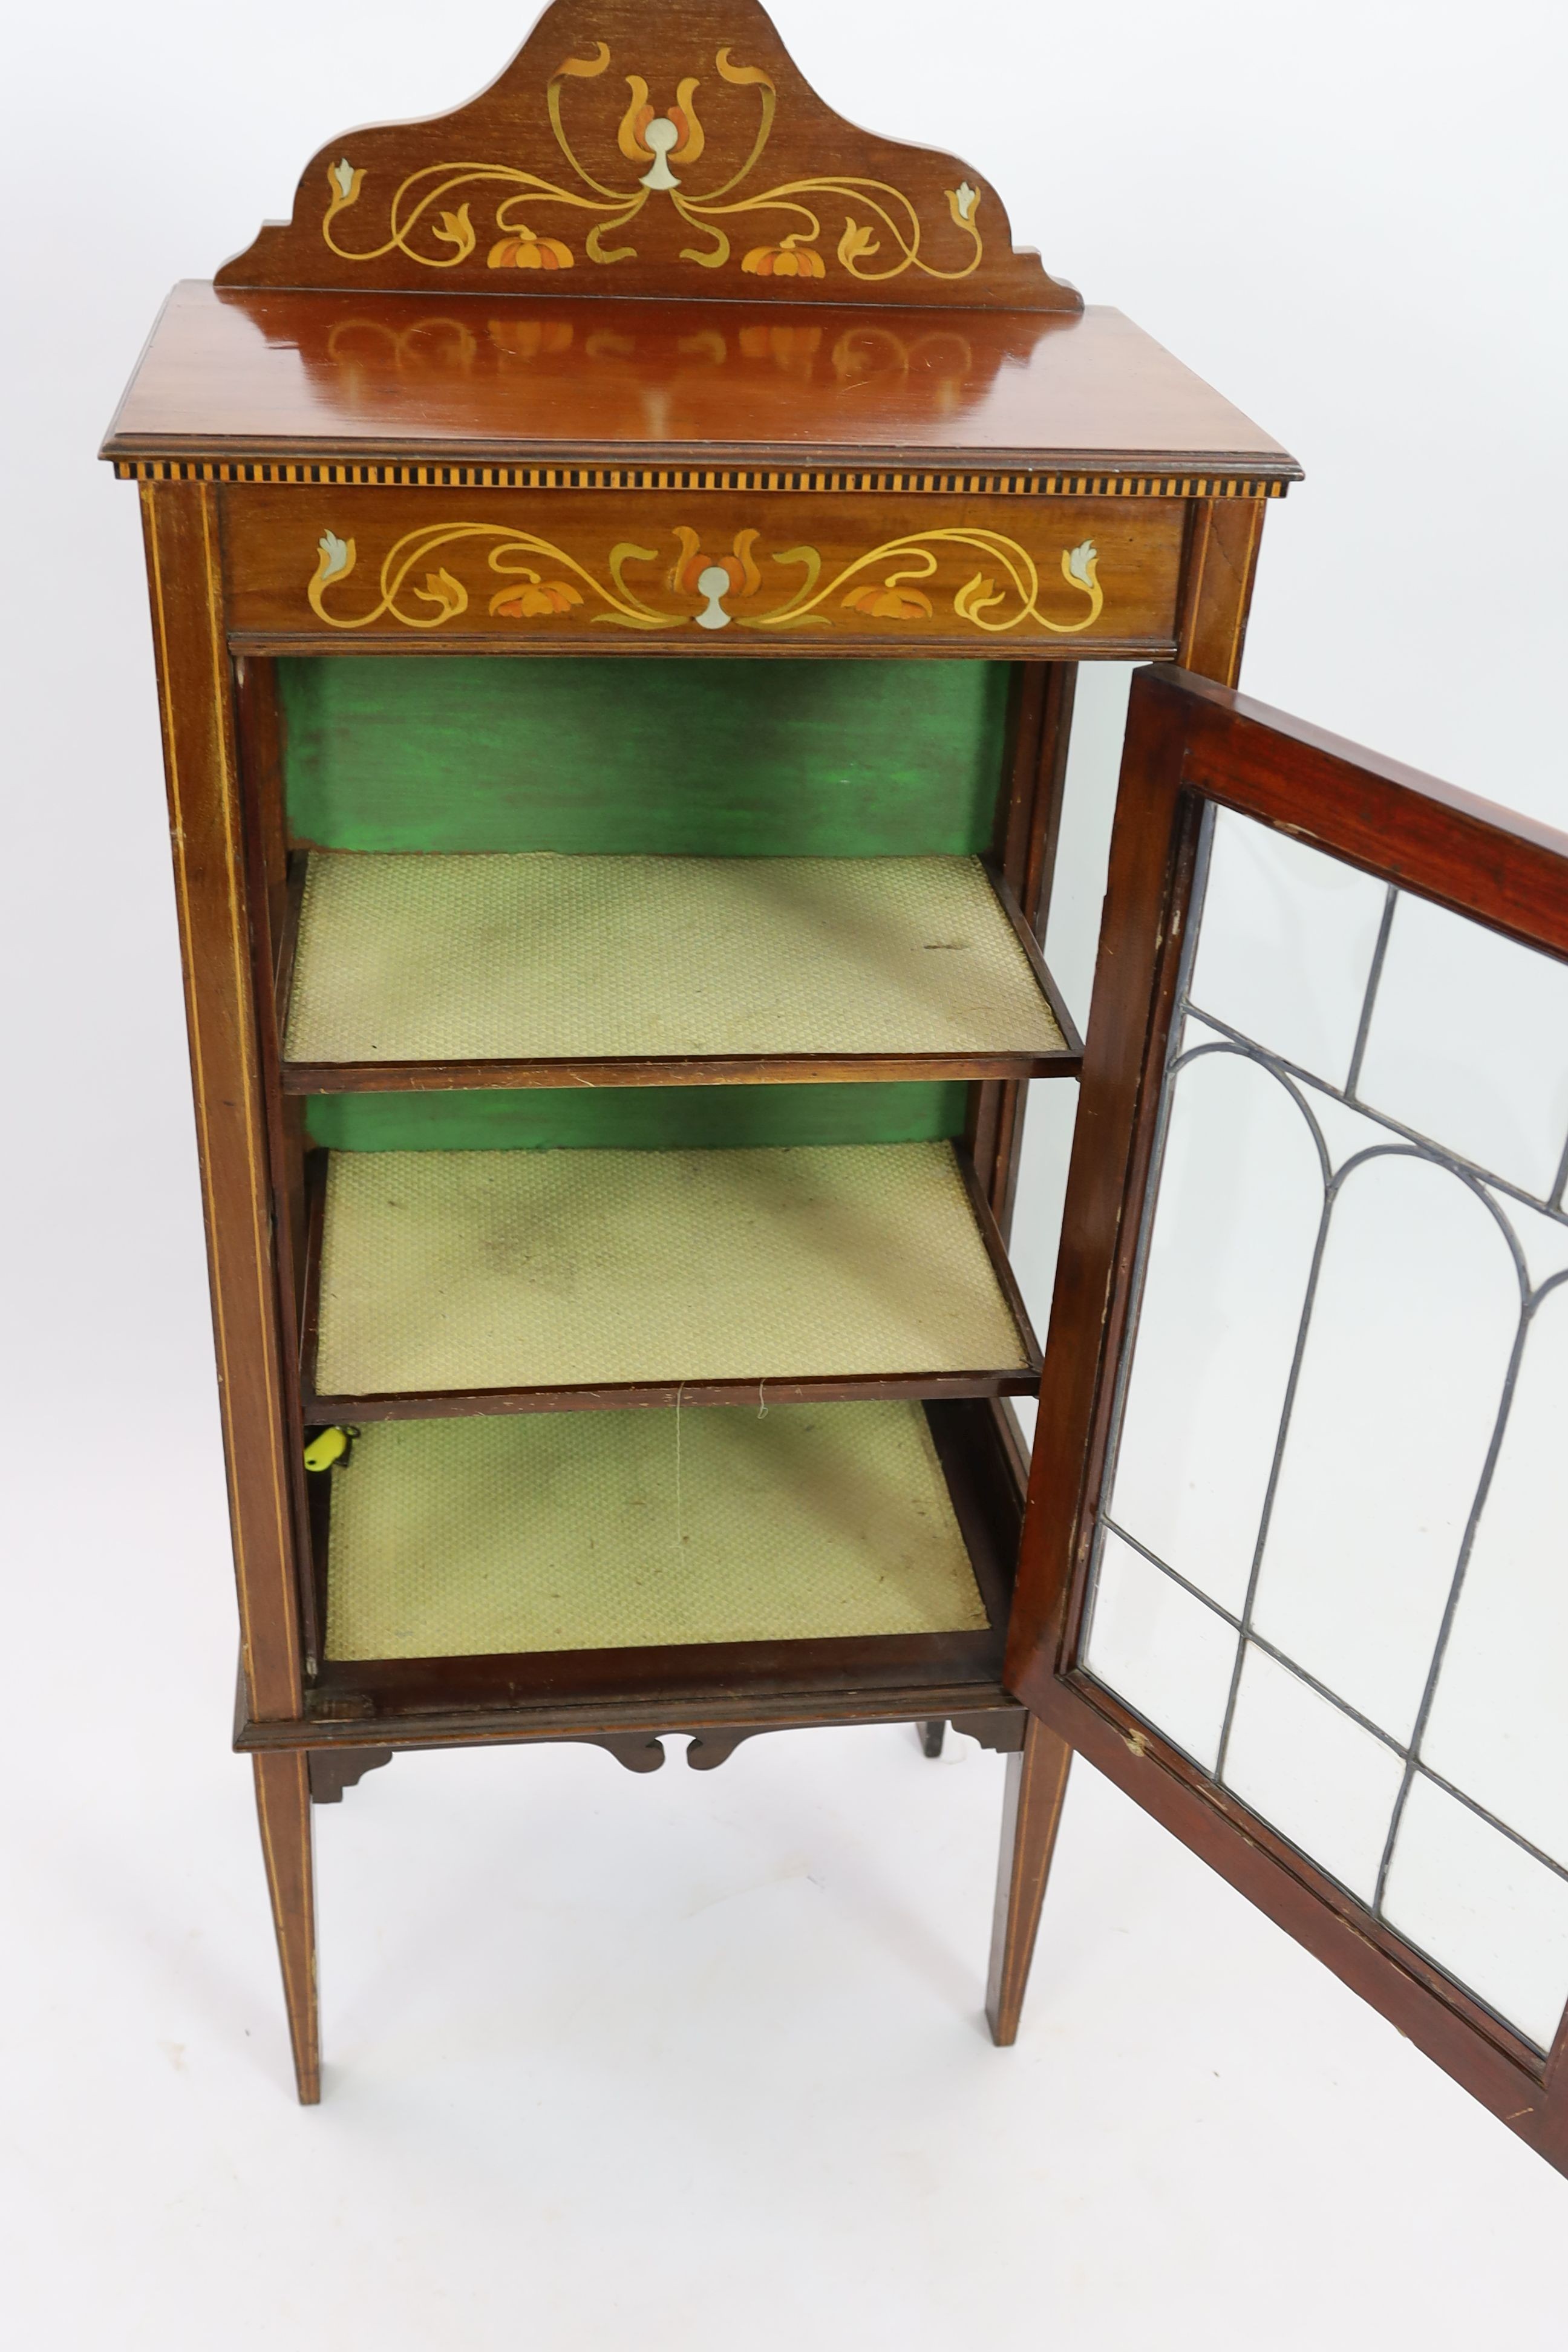 An Edwardian Art Nouveau inlaid mahogany display cabinet, with leaded glazed door, width 56cm depth 35cm height 132cm